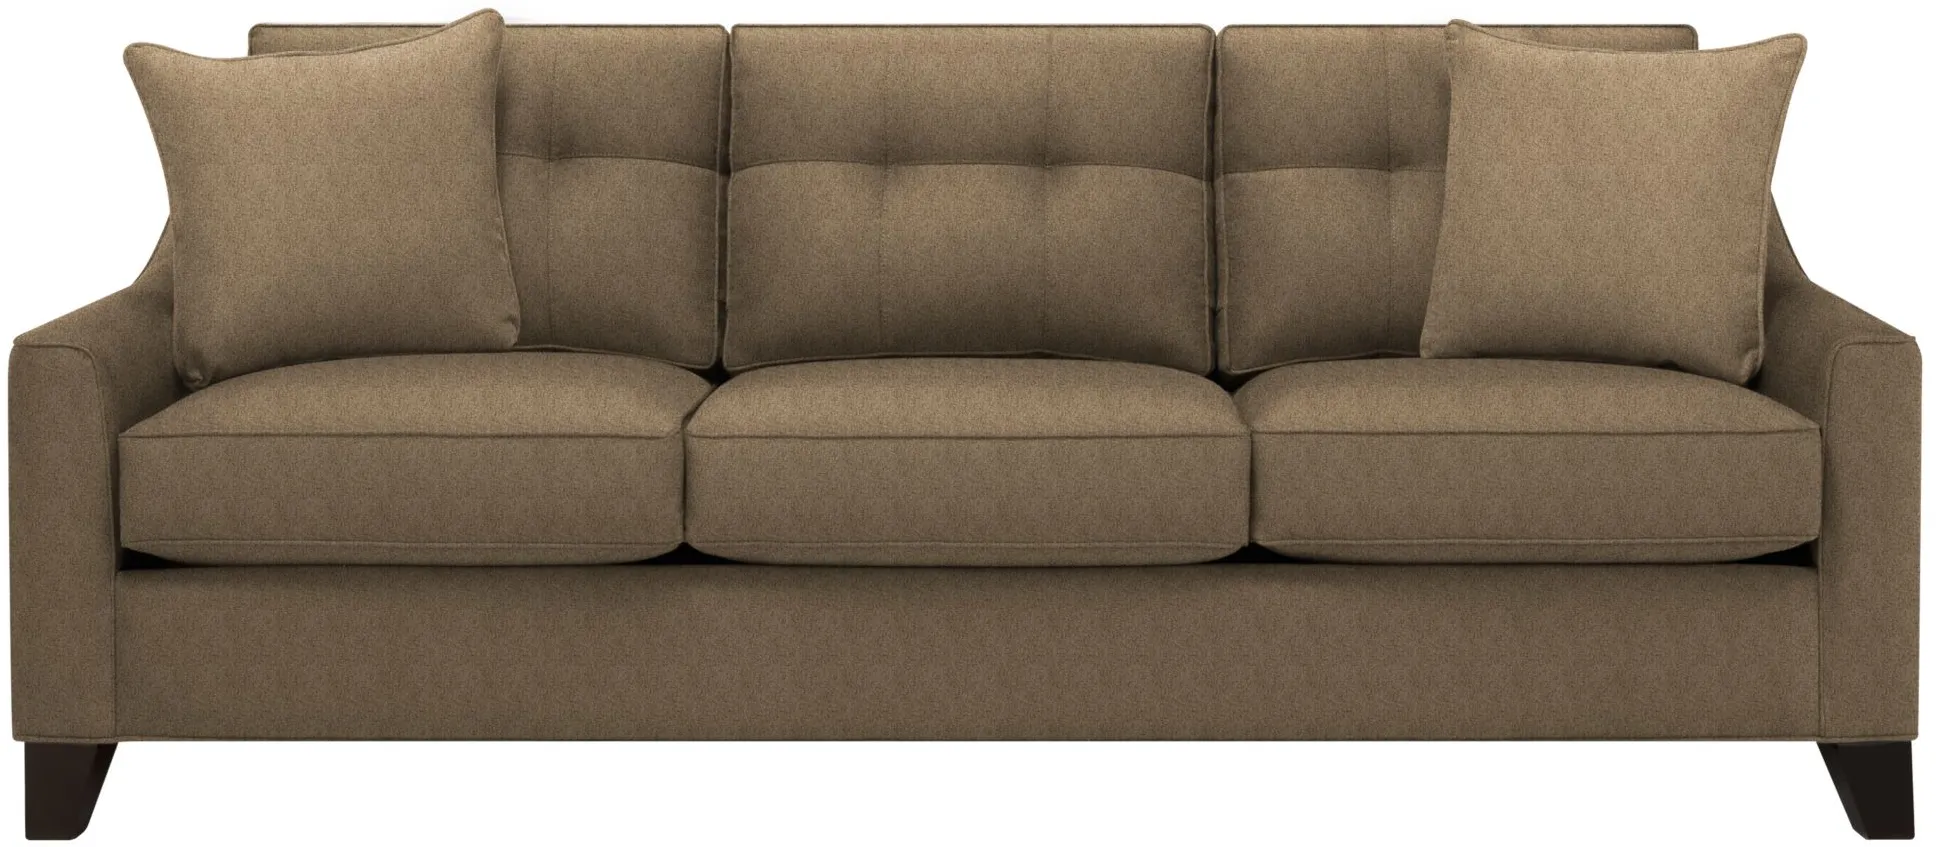 Carmine Sofa in Suede so Soft Mineral by H.M. Richards